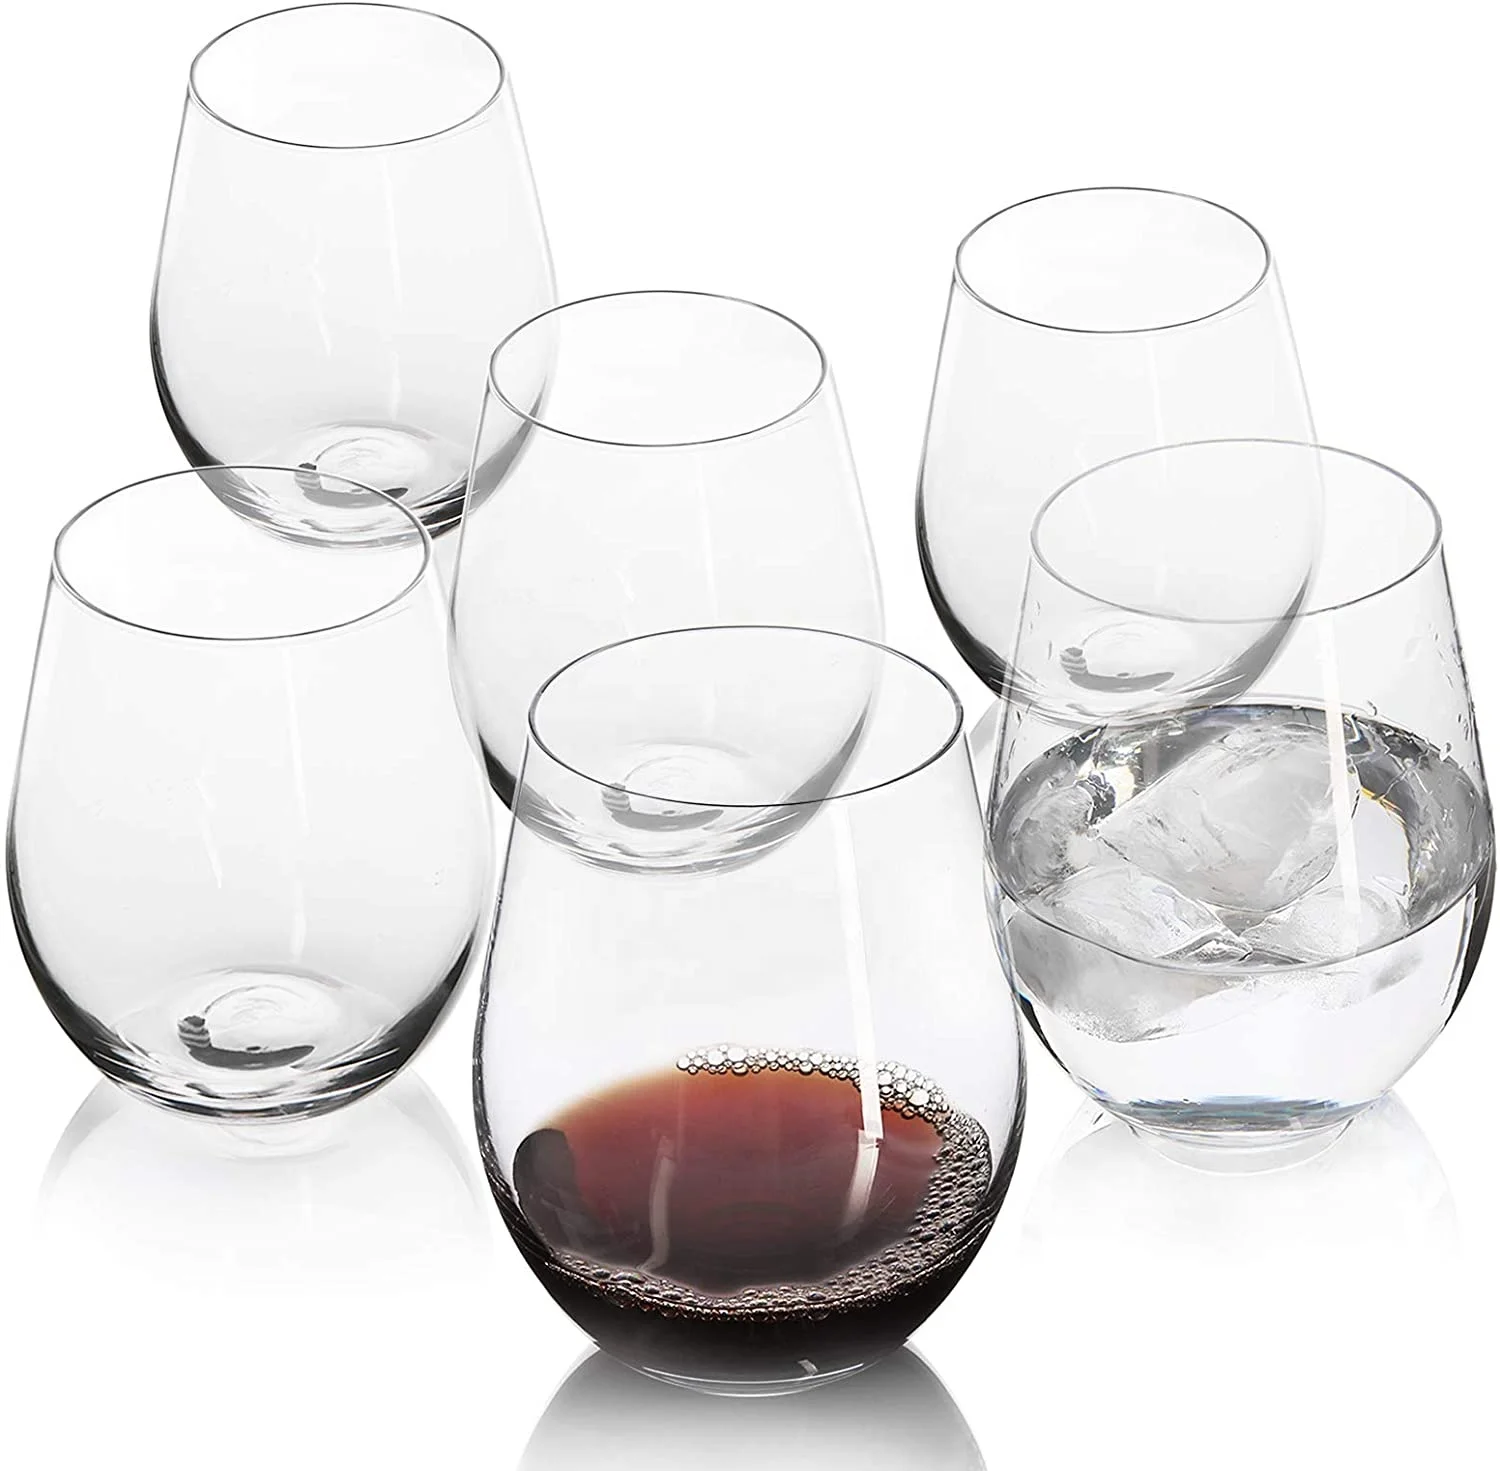 

Unbreakable Tritan Stemless Wine Glasses and Reusable Water Tumblers, Shatterproof Plastic Wine Glass 14oz/400ml, Clear